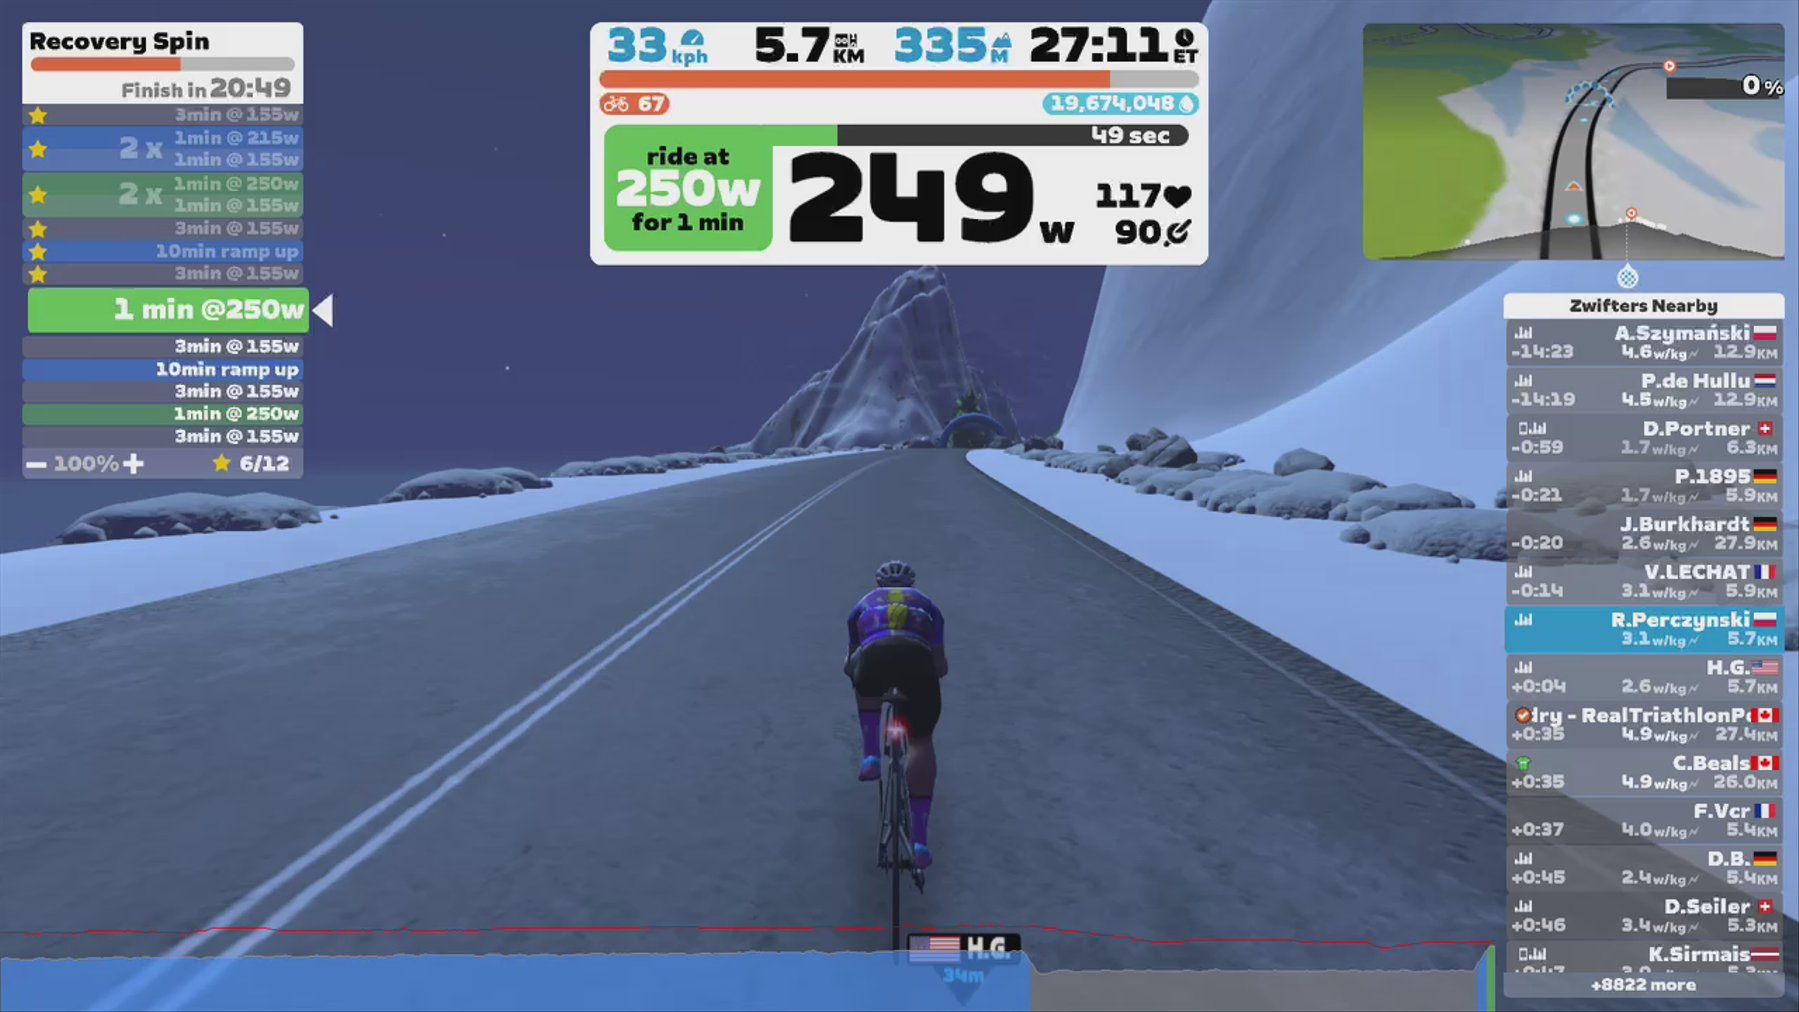 Zwift - Recovery Spin in Watopia